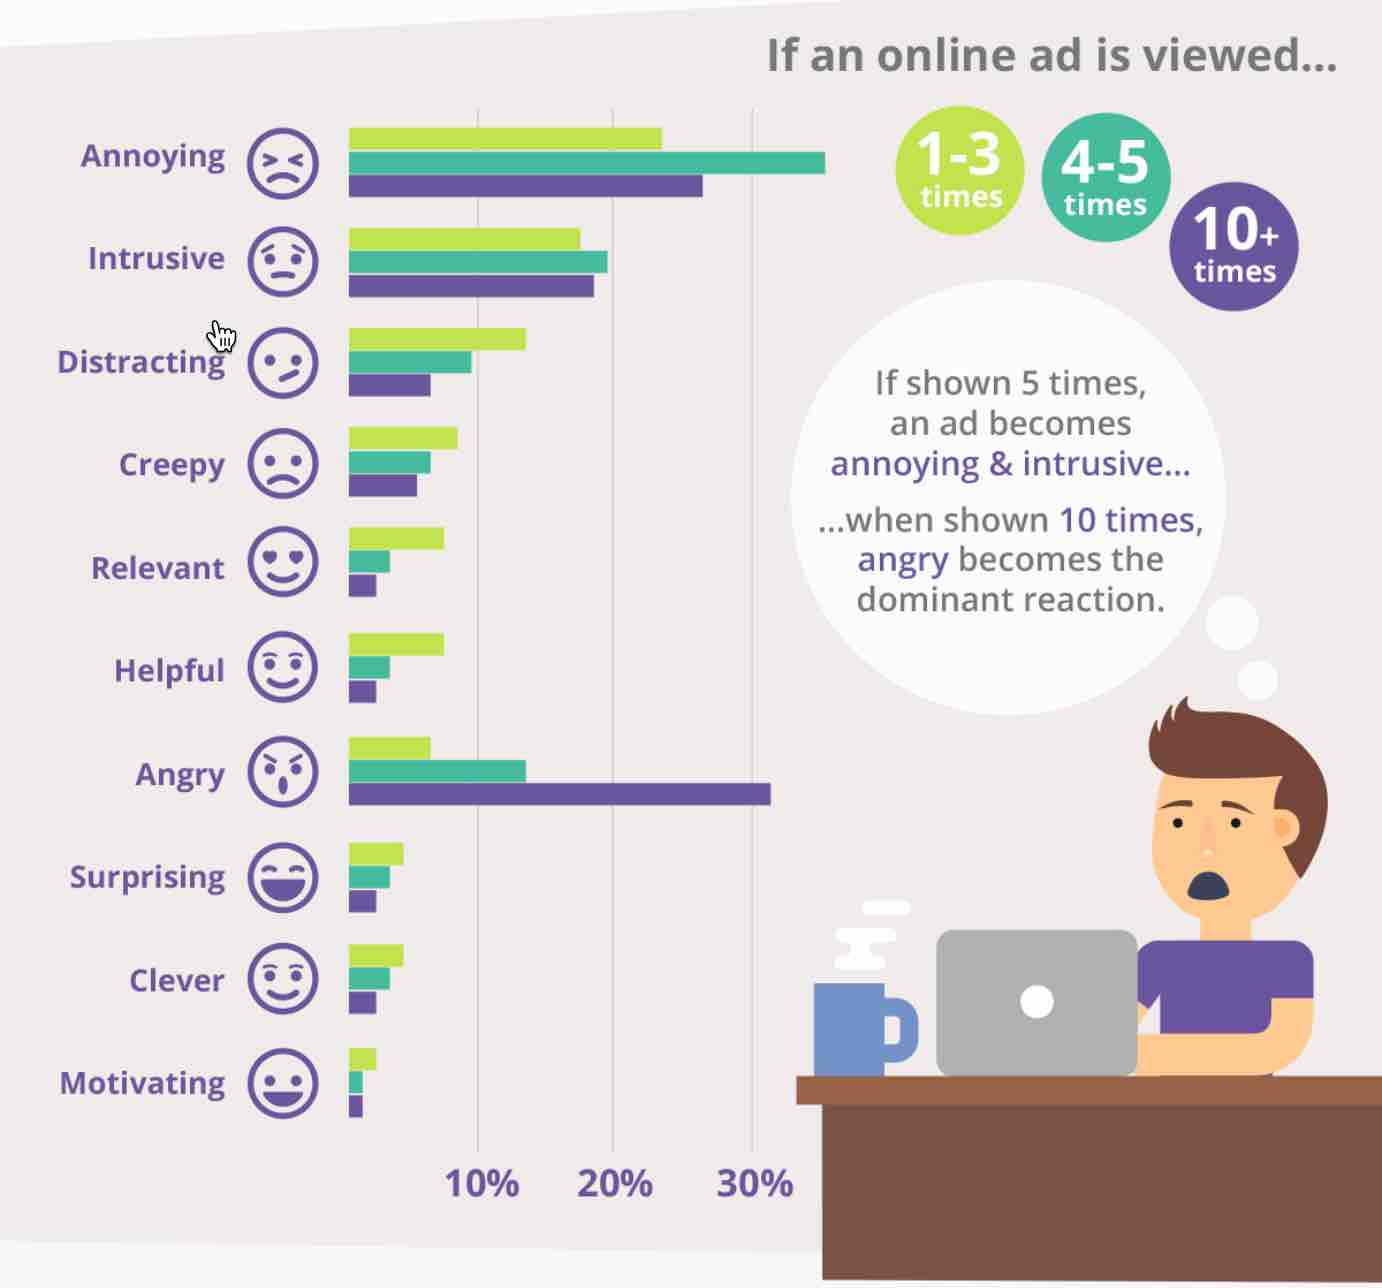 Bar graph of emotional reactions to online ad based on number of times user has viewed